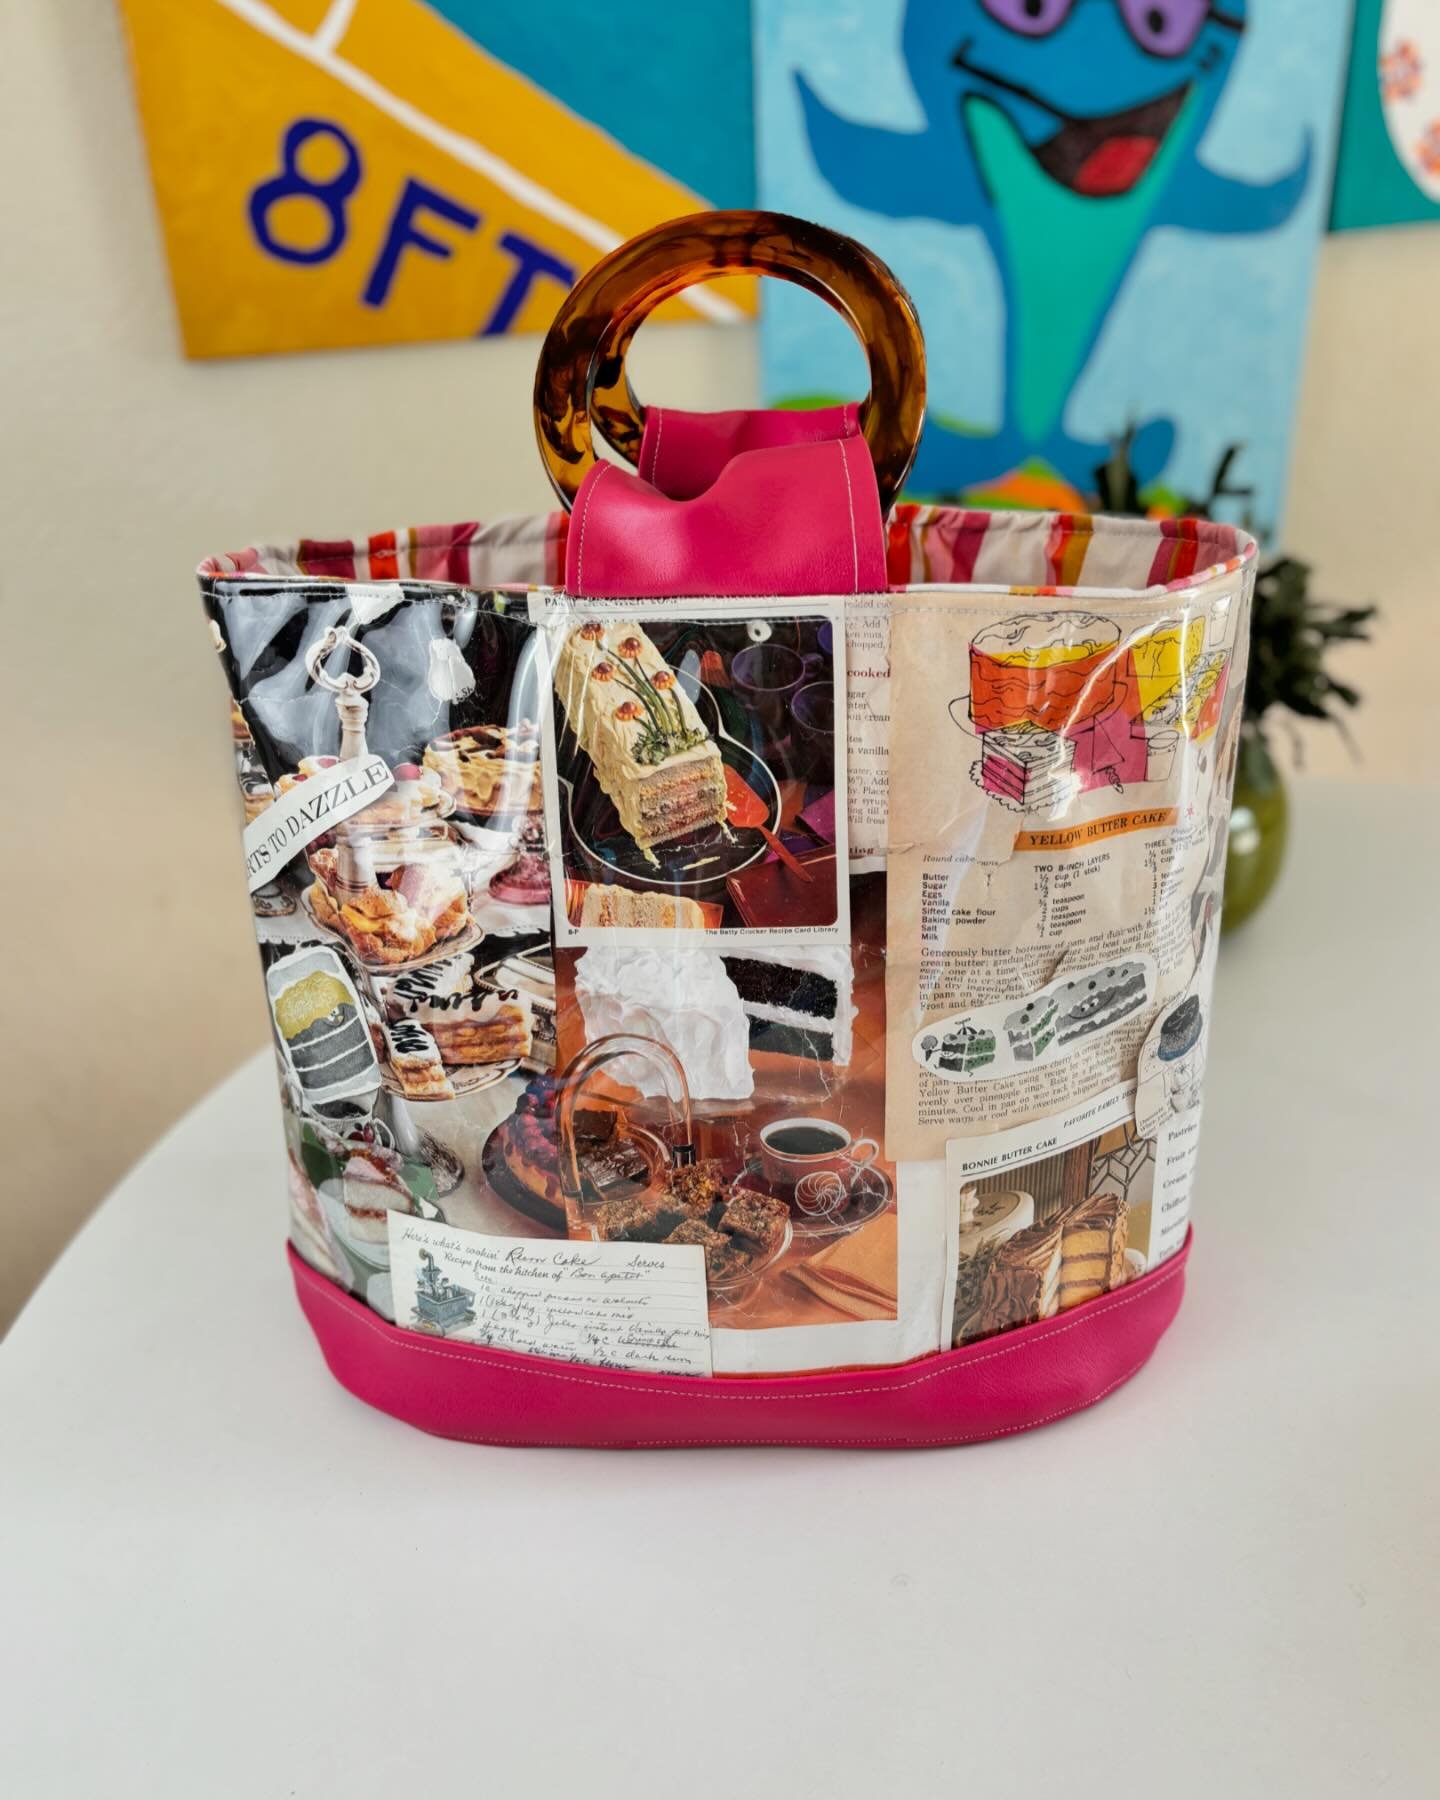 Desserts to dazzle! New vintage cookbook graphics Chelle Summer Take Everywhere Bag. So much to read and enjoy on each of these handmade, one-of-a-kind bags. (Happy Friday, everyone!) 

Find the bag at www.chellesummer.com.

#palmspringsstyle #handma